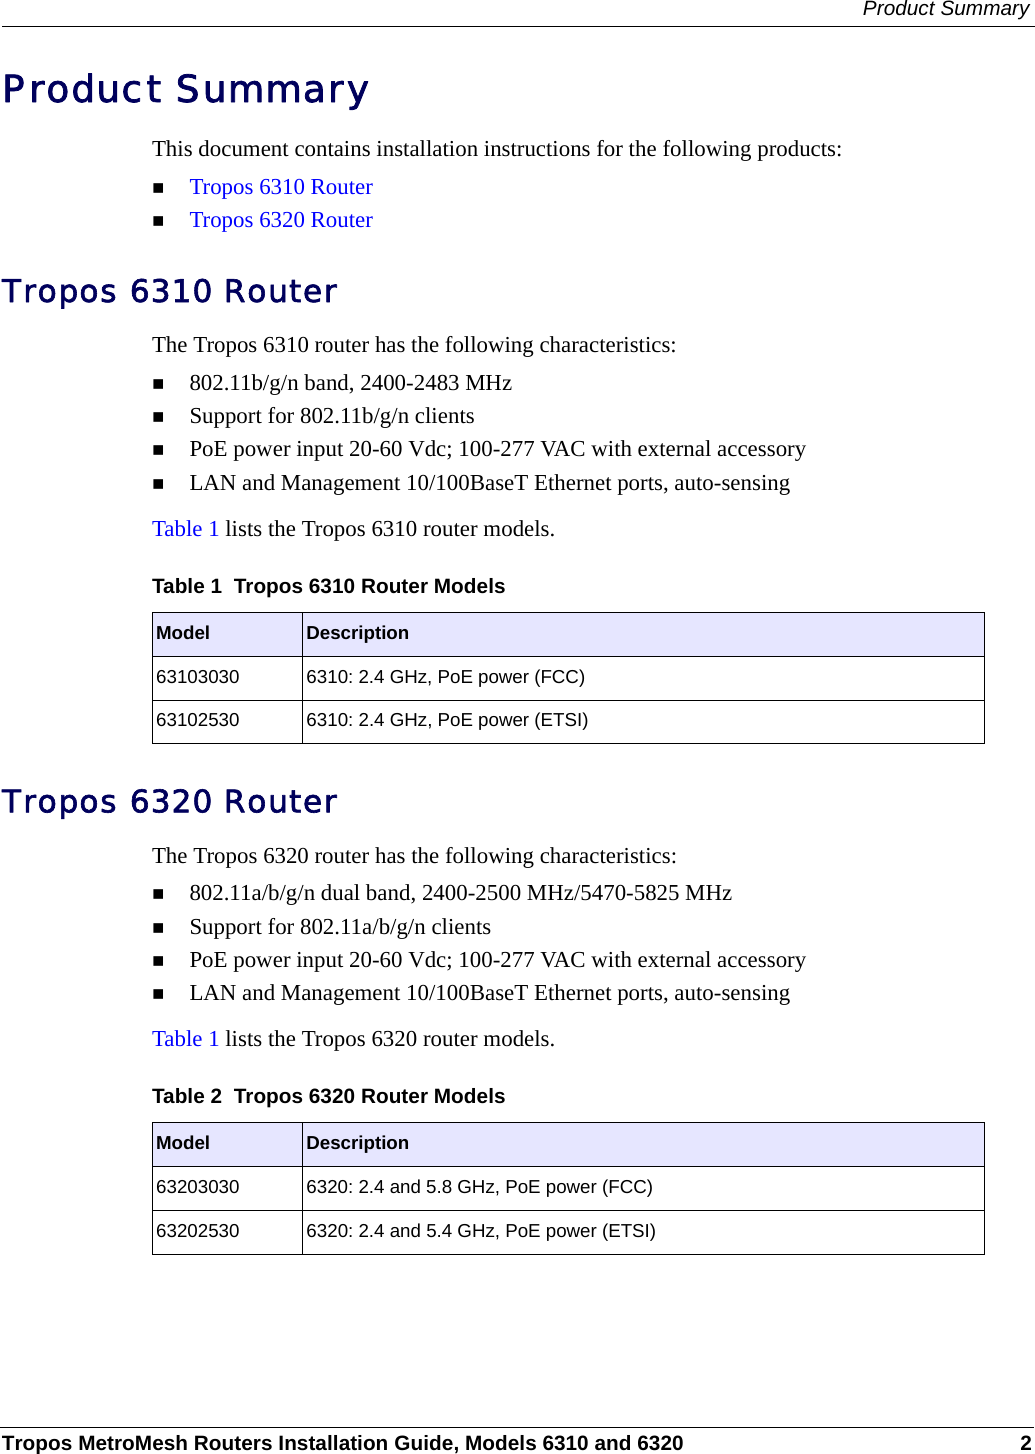 Product SummaryTropos MetroMesh Routers Installation Guide, Models 6310 and 6320 2Product SummaryThis document contains installation instructions for the following products:Tropos 6310 RouterTropos 6320 RouterTropos 6310 RouterThe Tropos 6310 router has the following characteristics:802.11b/g/n band, 2400-2483 MHzSupport for 802.11b/g/n clientsPoE power input 20-60 Vdc; 100-277 VAC with external accessoryLAN and Management 10/100BaseT Ethernet ports, auto-sensingTable 1 lists the Tropos 6310 router models.Tropos 6320 RouterThe Tropos 6320 router has the following characteristics: 802.11a/b/g/n dual band, 2400-2500 MHz/5470-5825 MHzSupport for 802.11a/b/g/n clientsPoE power input 20-60 Vdc; 100-277 VAC with external accessoryLAN and Management 10/100BaseT Ethernet ports, auto-sensingTable 1 lists the Tropos 6320 router models.Table 1  Tropos 6310 Router ModelsModel Description63103030 6310: 2.4 GHz, PoE power (FCC)63102530 6310: 2.4 GHz, PoE power (ETSI)Table 2  Tropos 6320 Router ModelsModel Description63203030 6320: 2.4 and 5.8 GHz, PoE power (FCC)63202530 6320: 2.4 and 5.4 GHz, PoE power (ETSI)